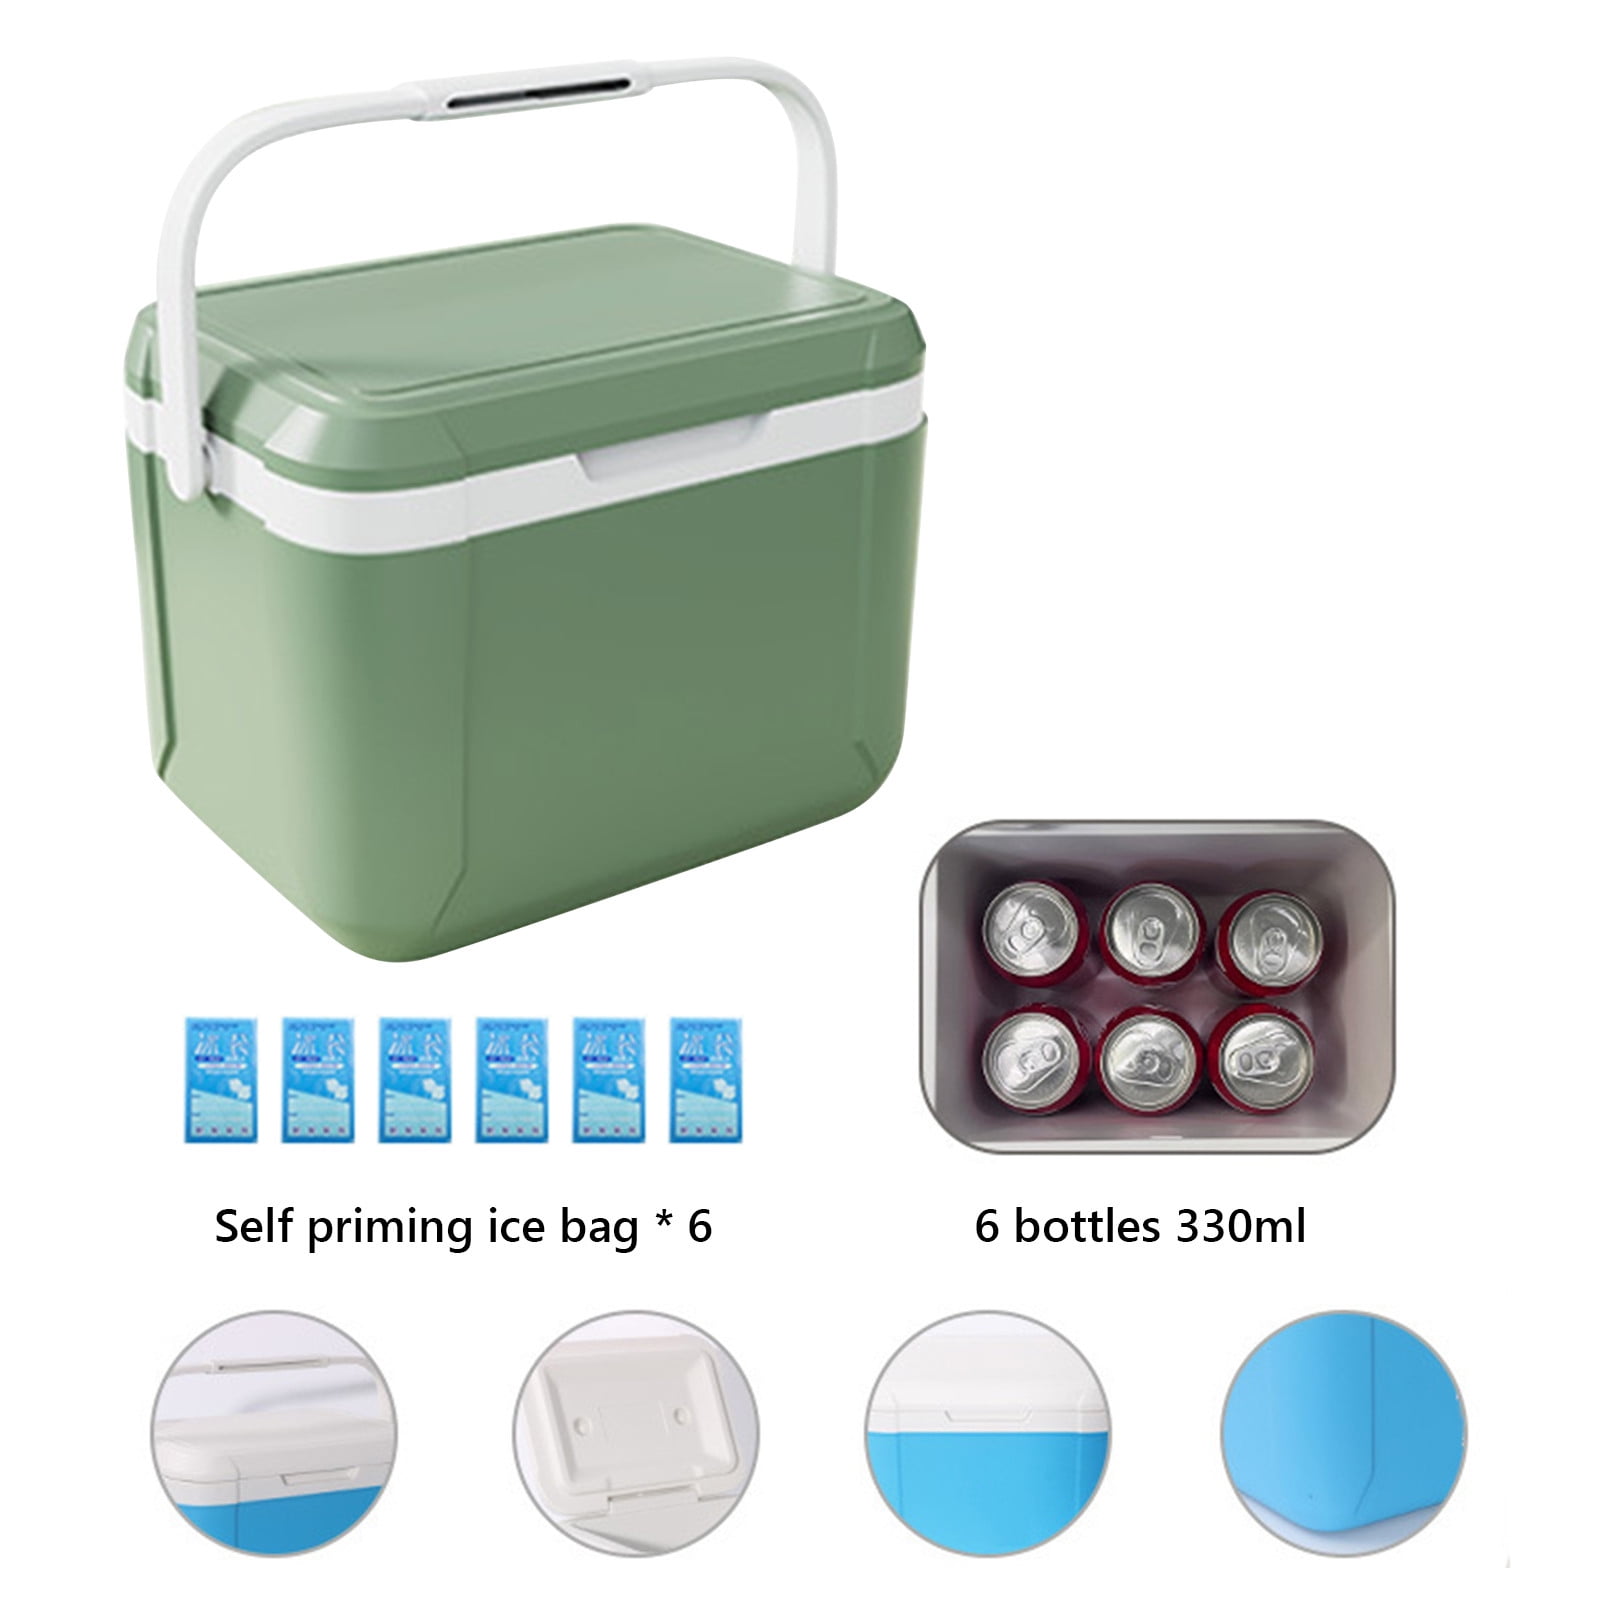 Tiitstoy 5 Liter Camping Cooler - Hard Ice Retention Cooler Lunch